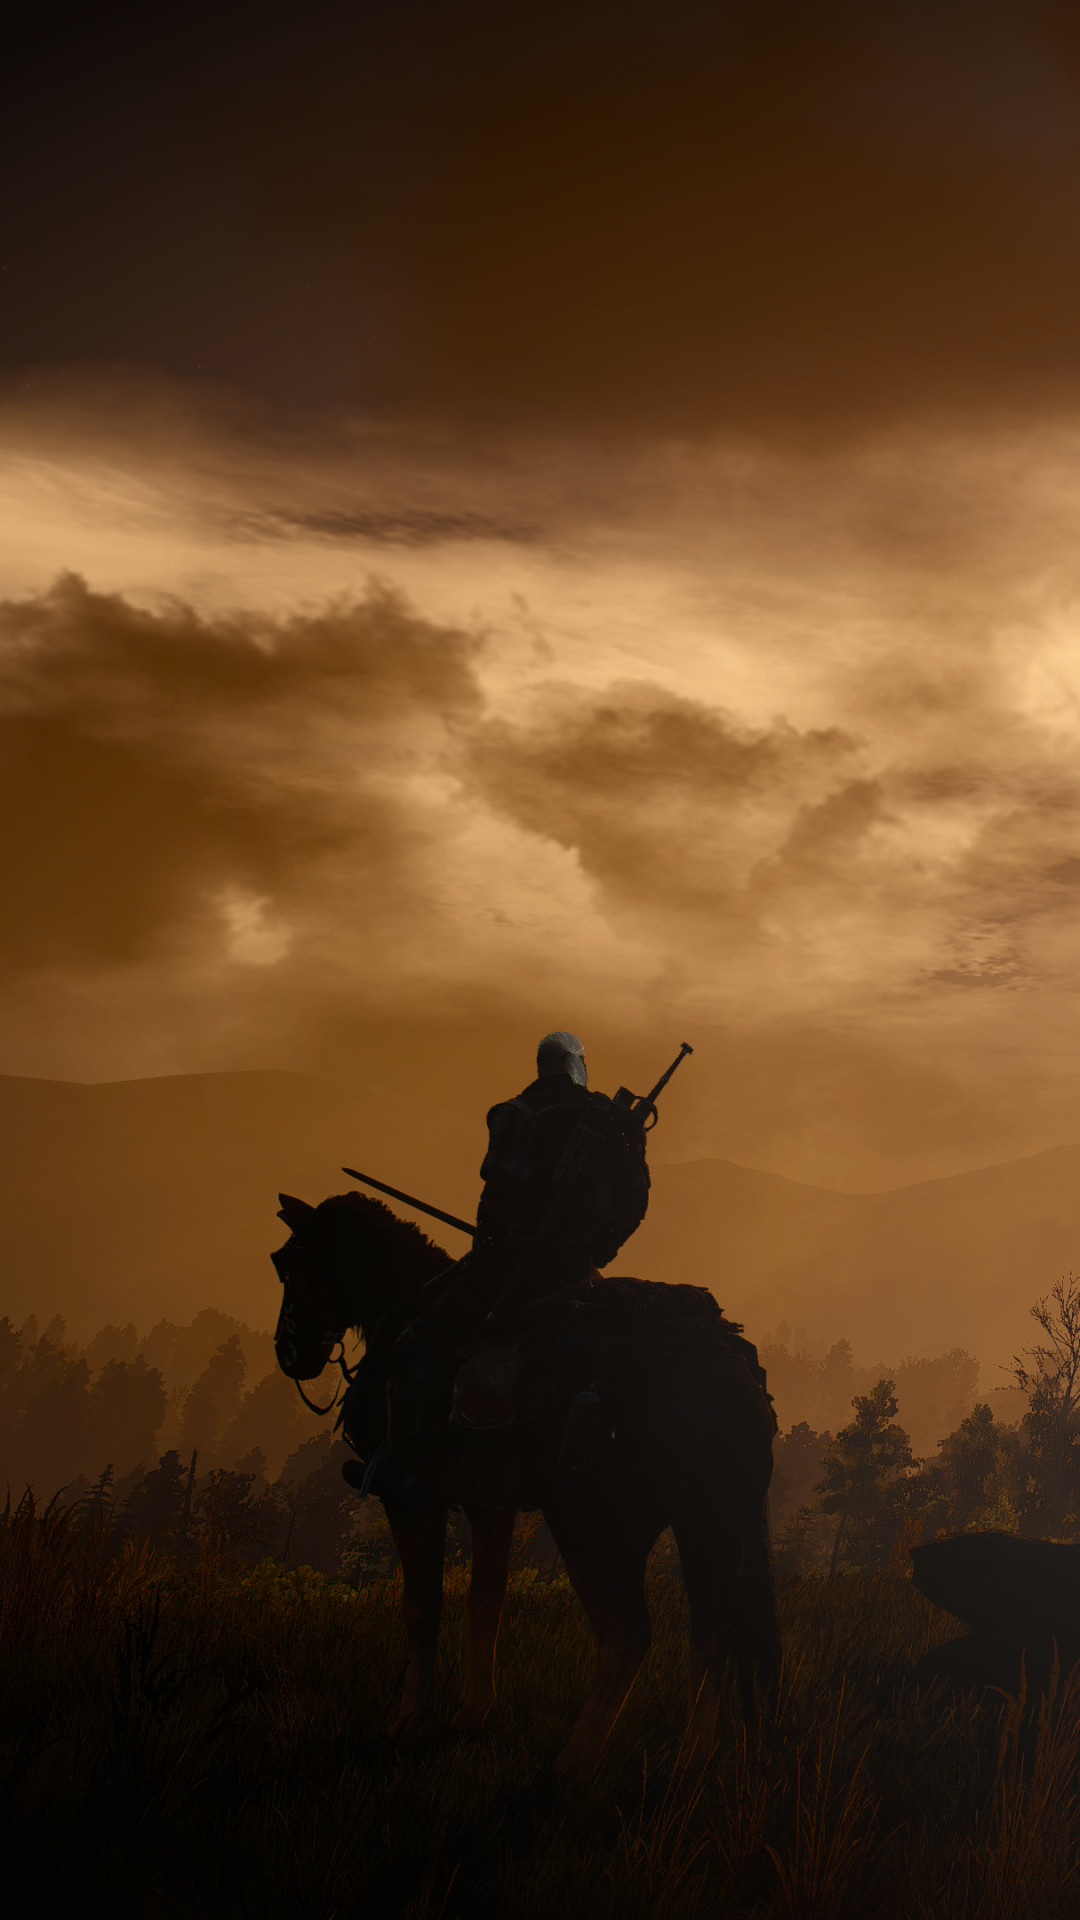 the witcher 3 iphone wallpaper,horse,sky,landscape,photography,stallion